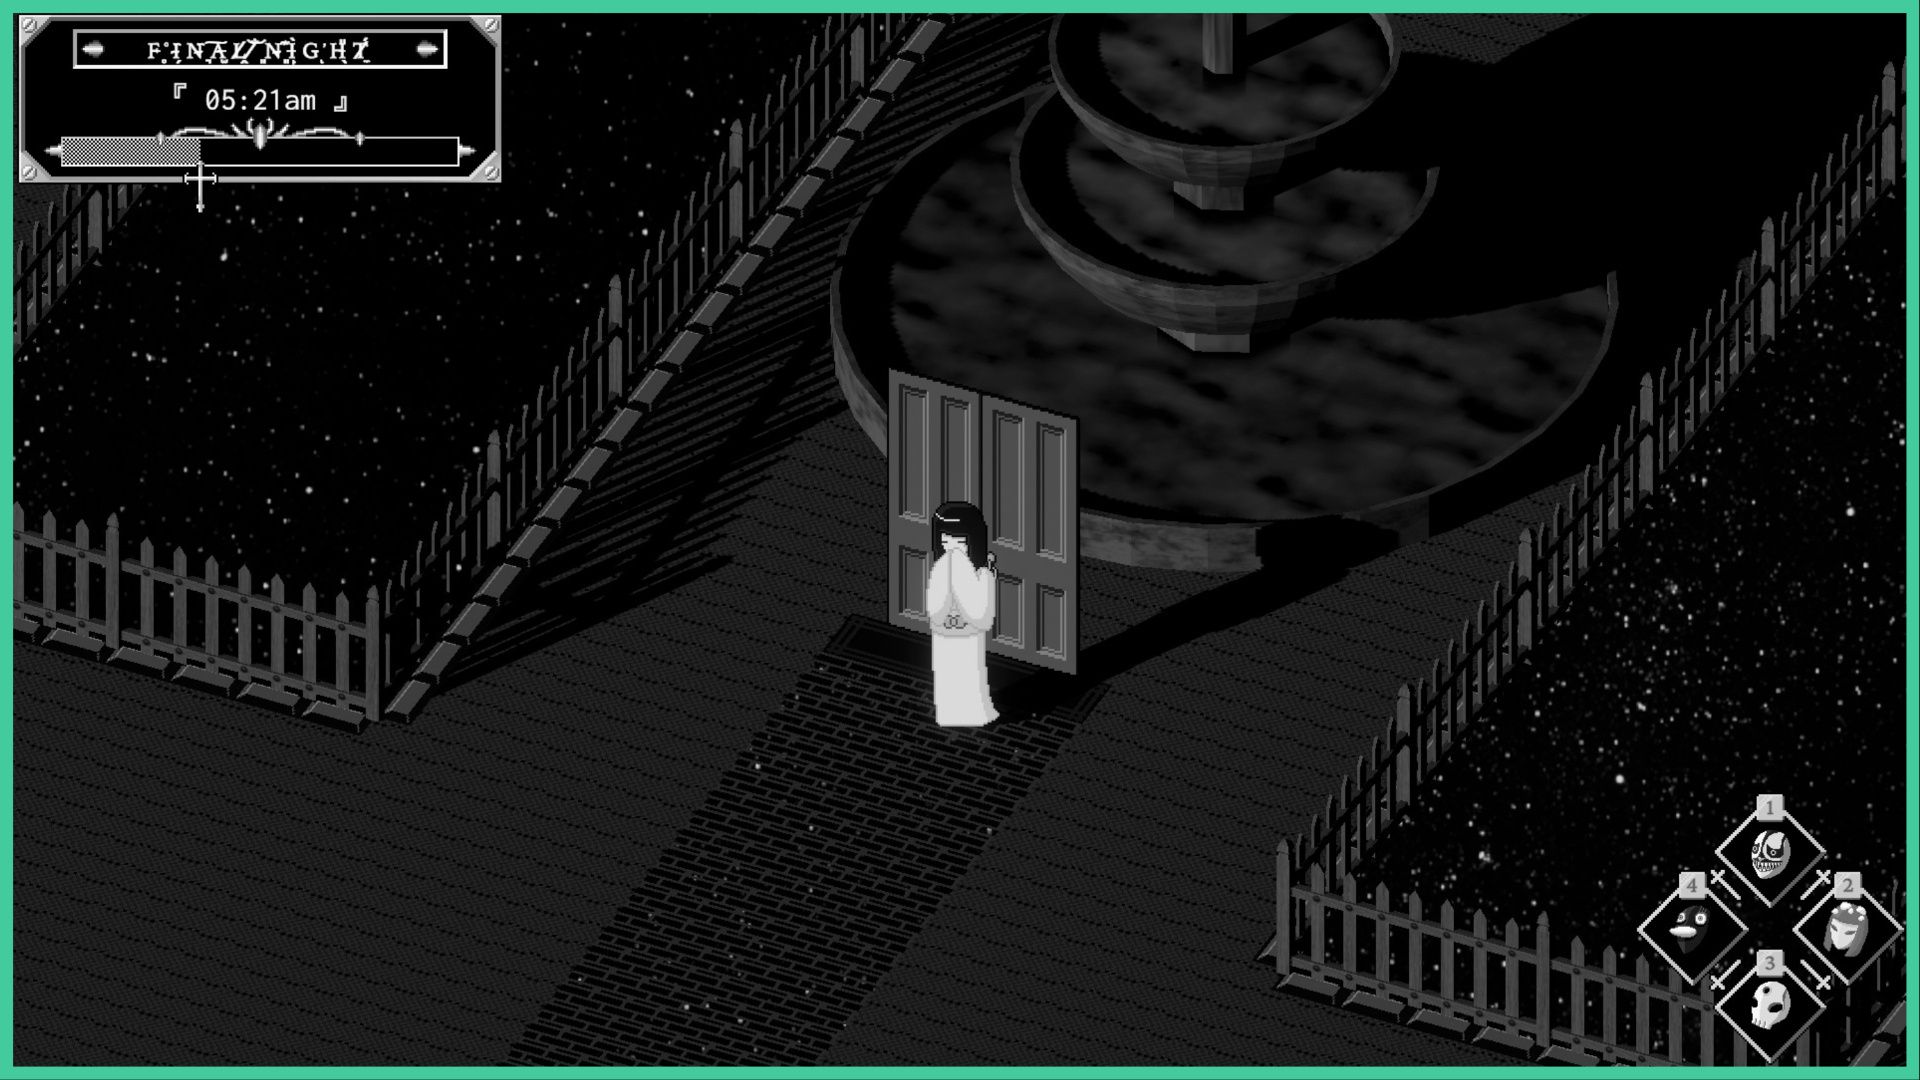 feature image for our night loops news, the image features a screenshot from the game of a woman wearing a kimono while standing in front of a lone door in the middle of a pathway, gated off by a wooden fence, behind the door is a large fountain